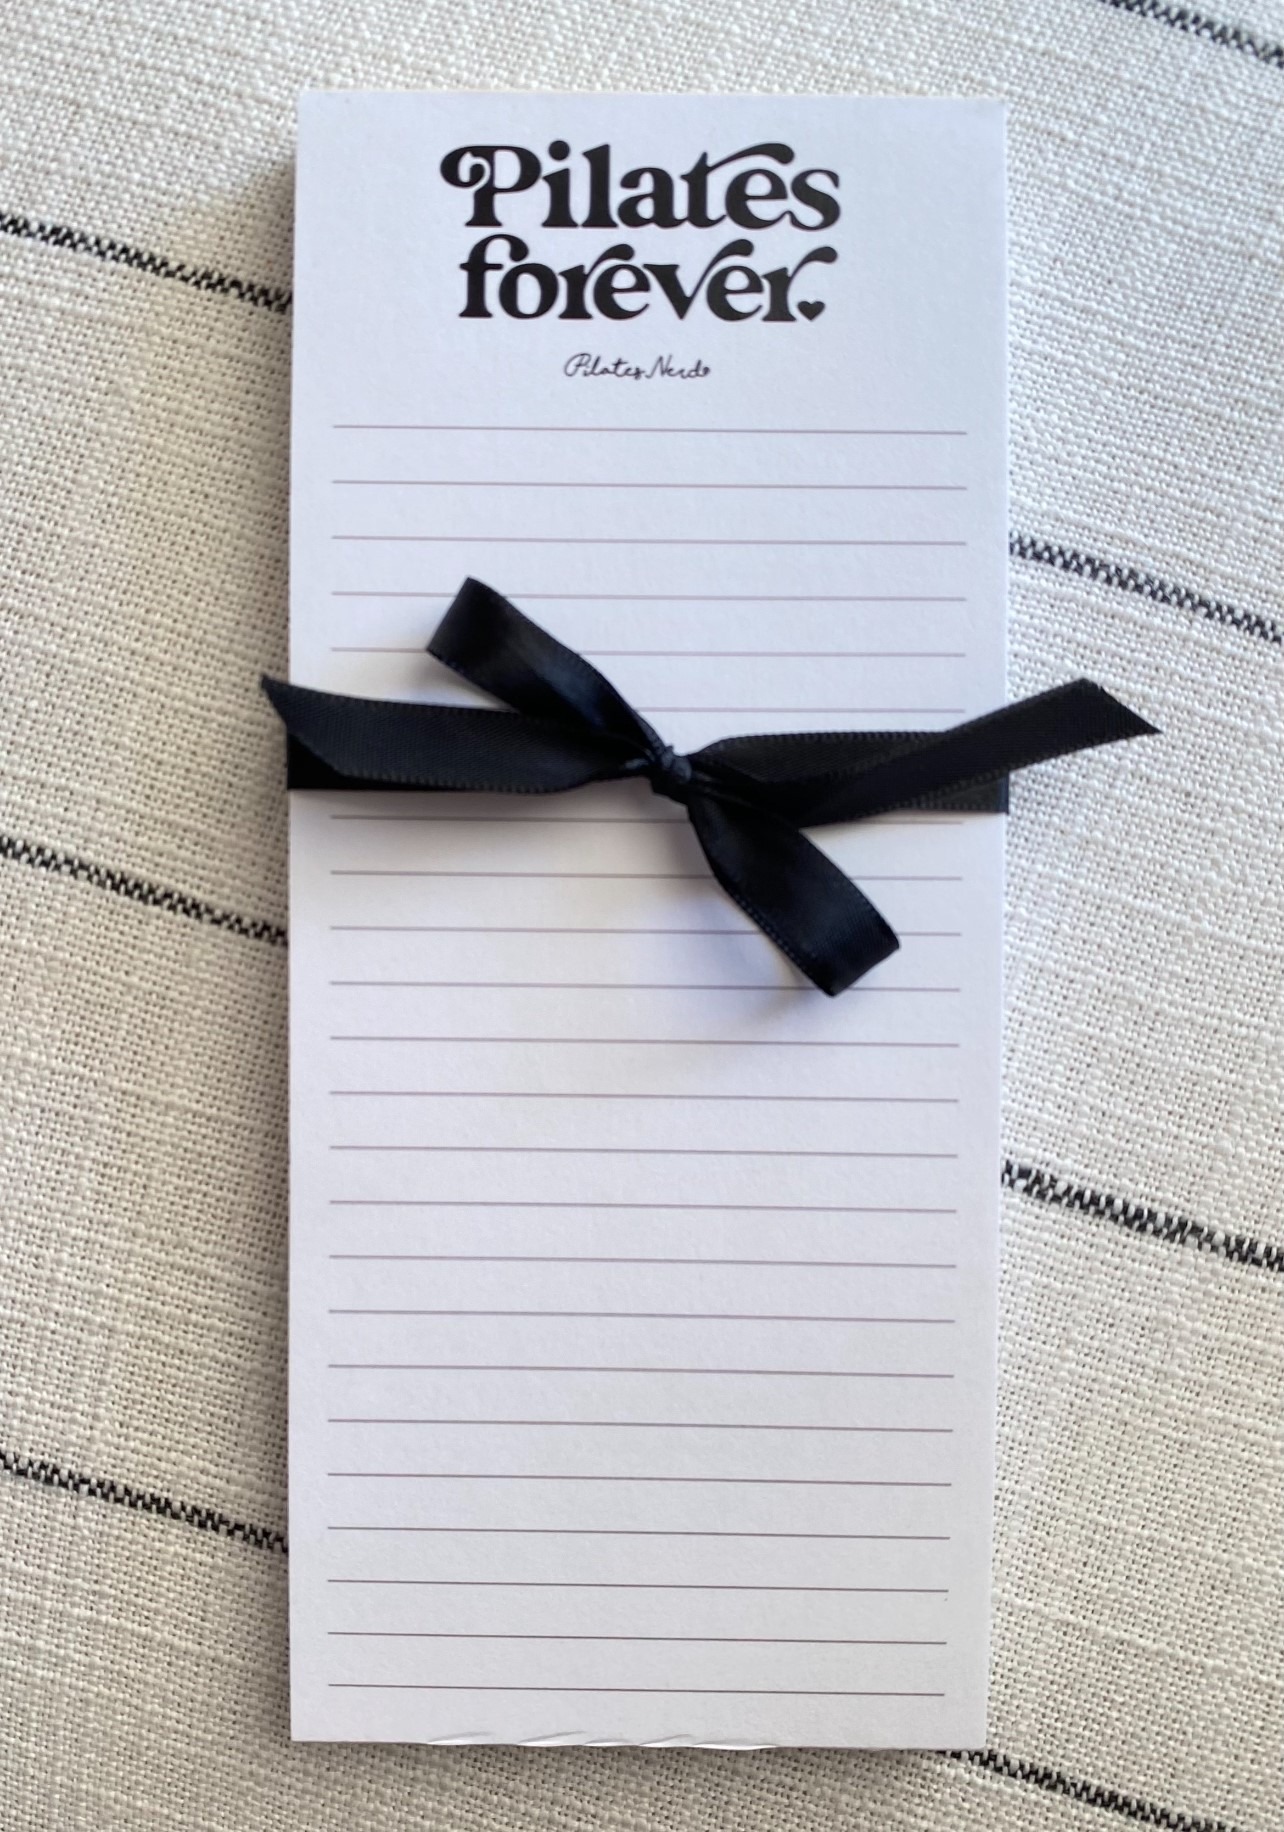 Pilates Forever - Set of 2 Notepads